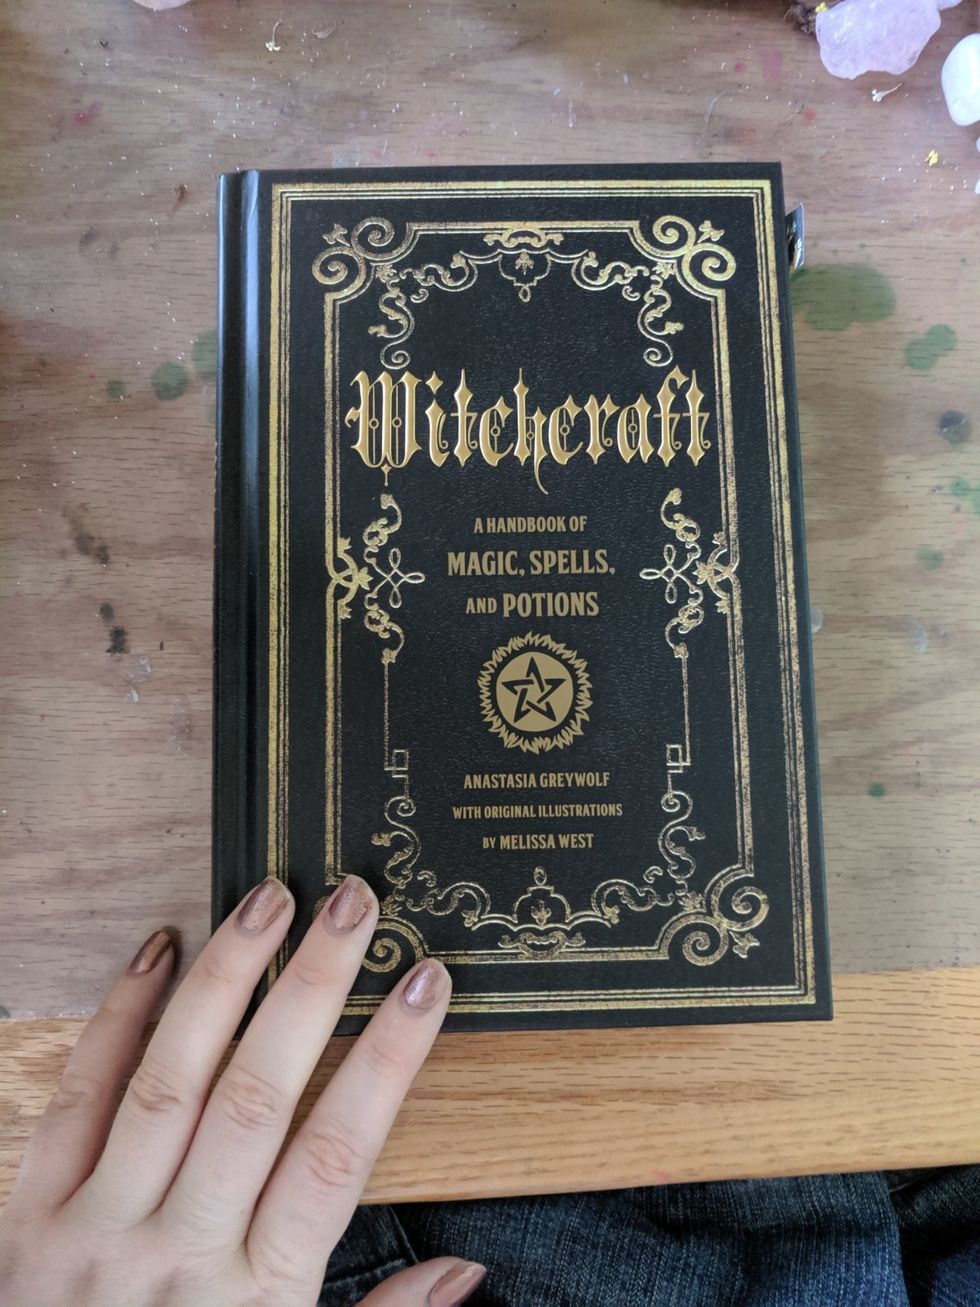 How I Got Into Witchcraft